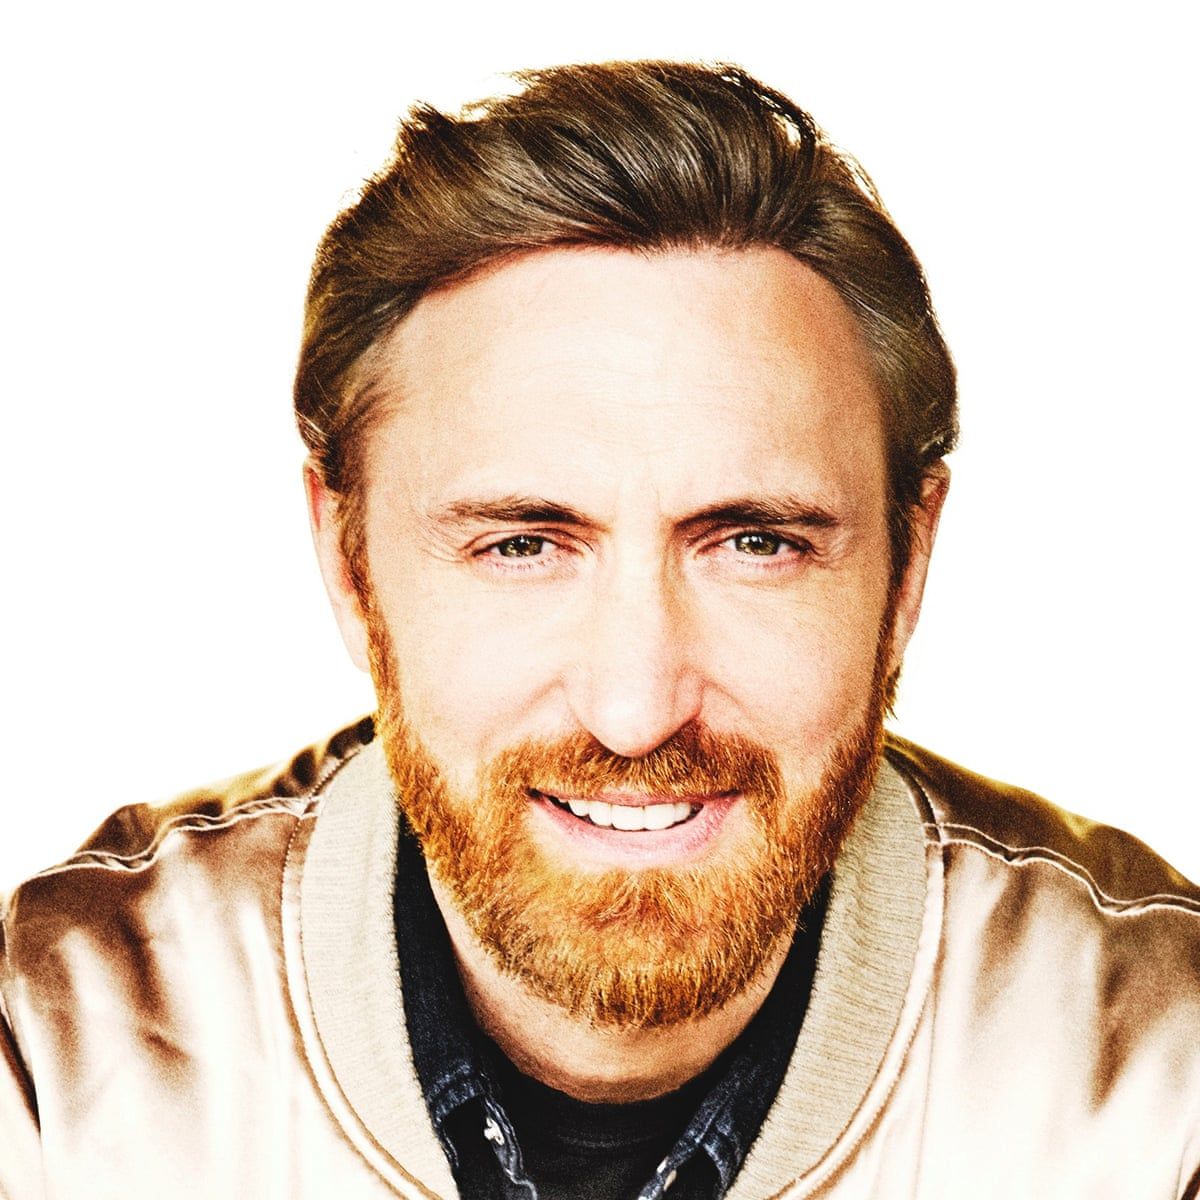 David Guetta: 'Who would play me in the film of my life? Ryan Gosling'